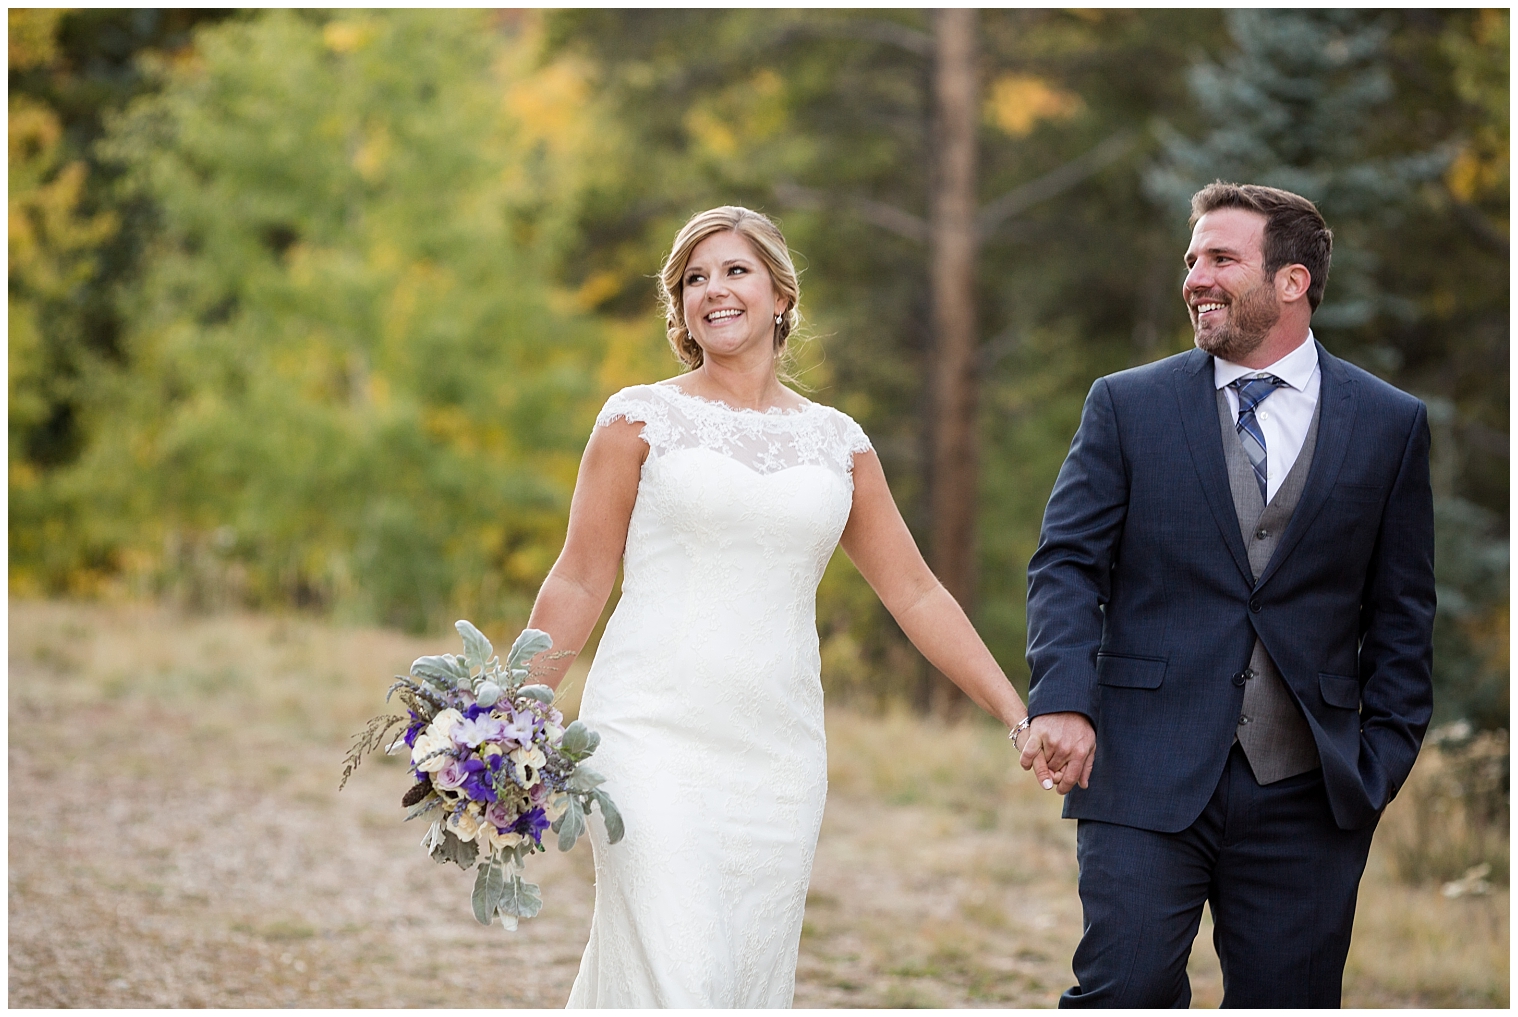 During portraits at their Breckenridge wedding, the wedding couple walk together hand in hand.